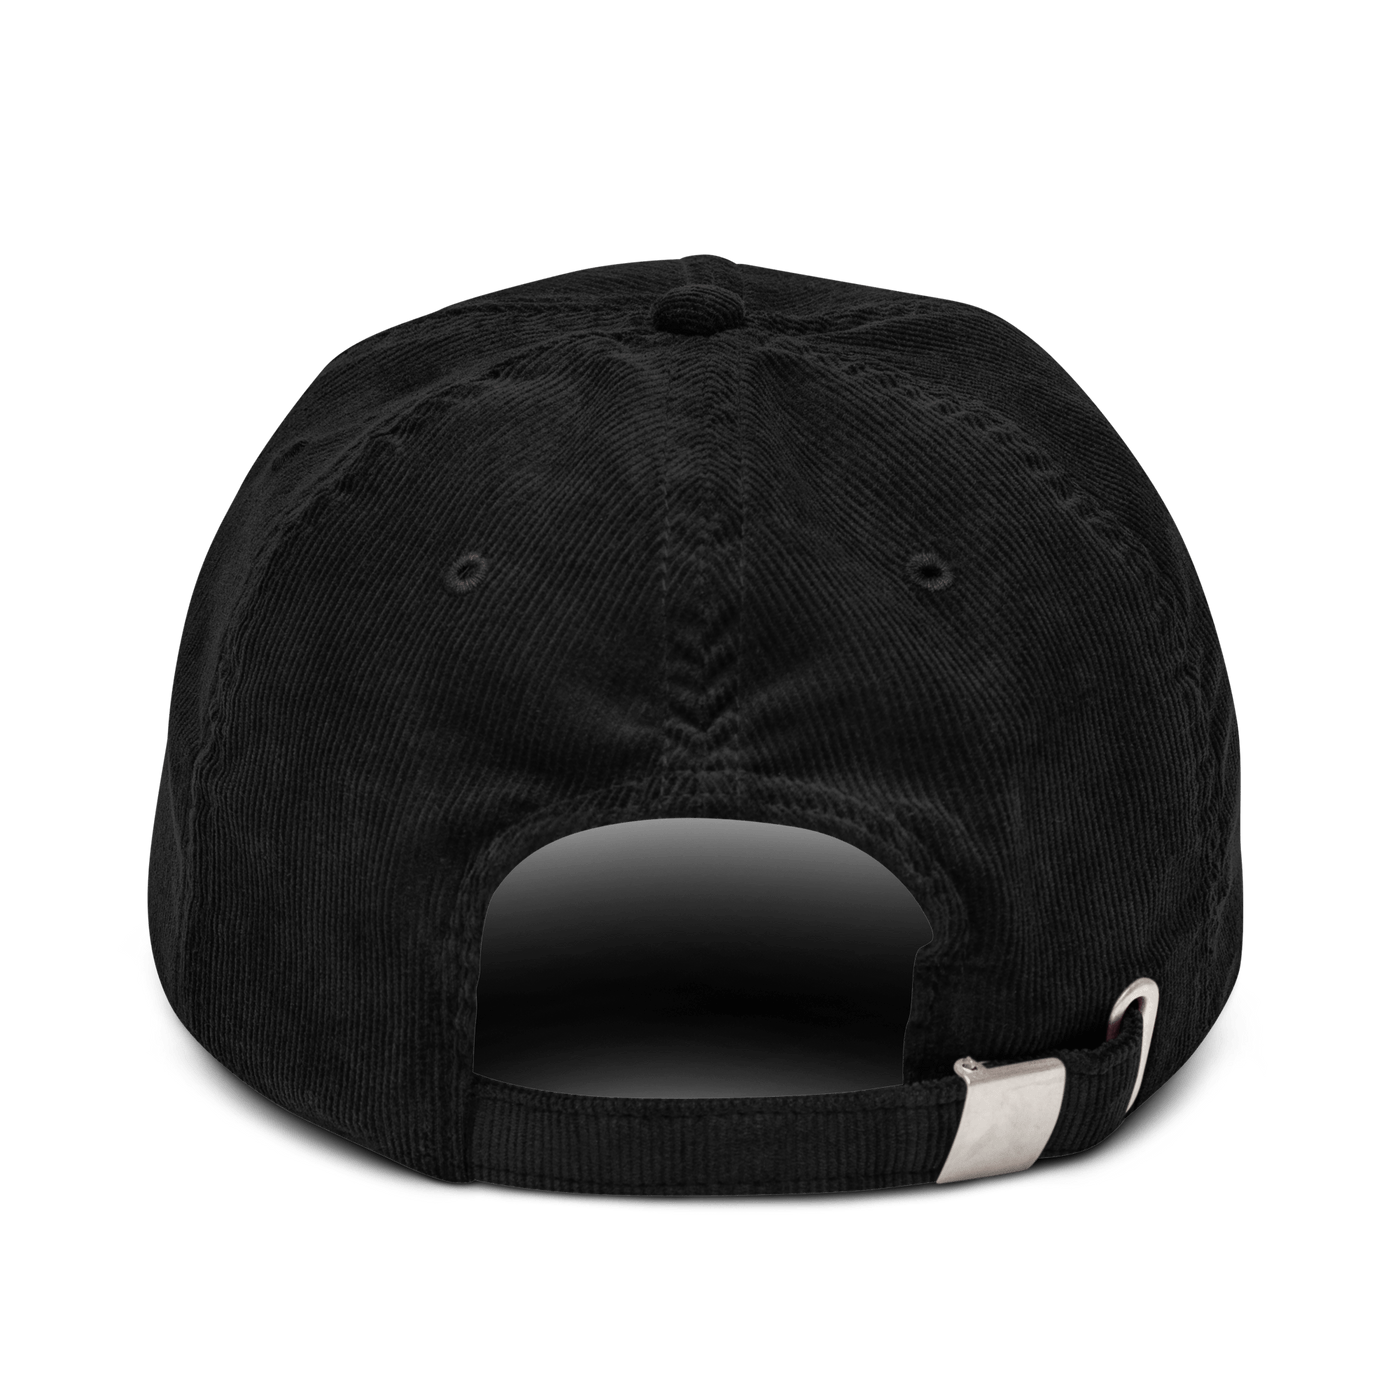 SOS Corduroy hat - Black - Just Another Cap Store